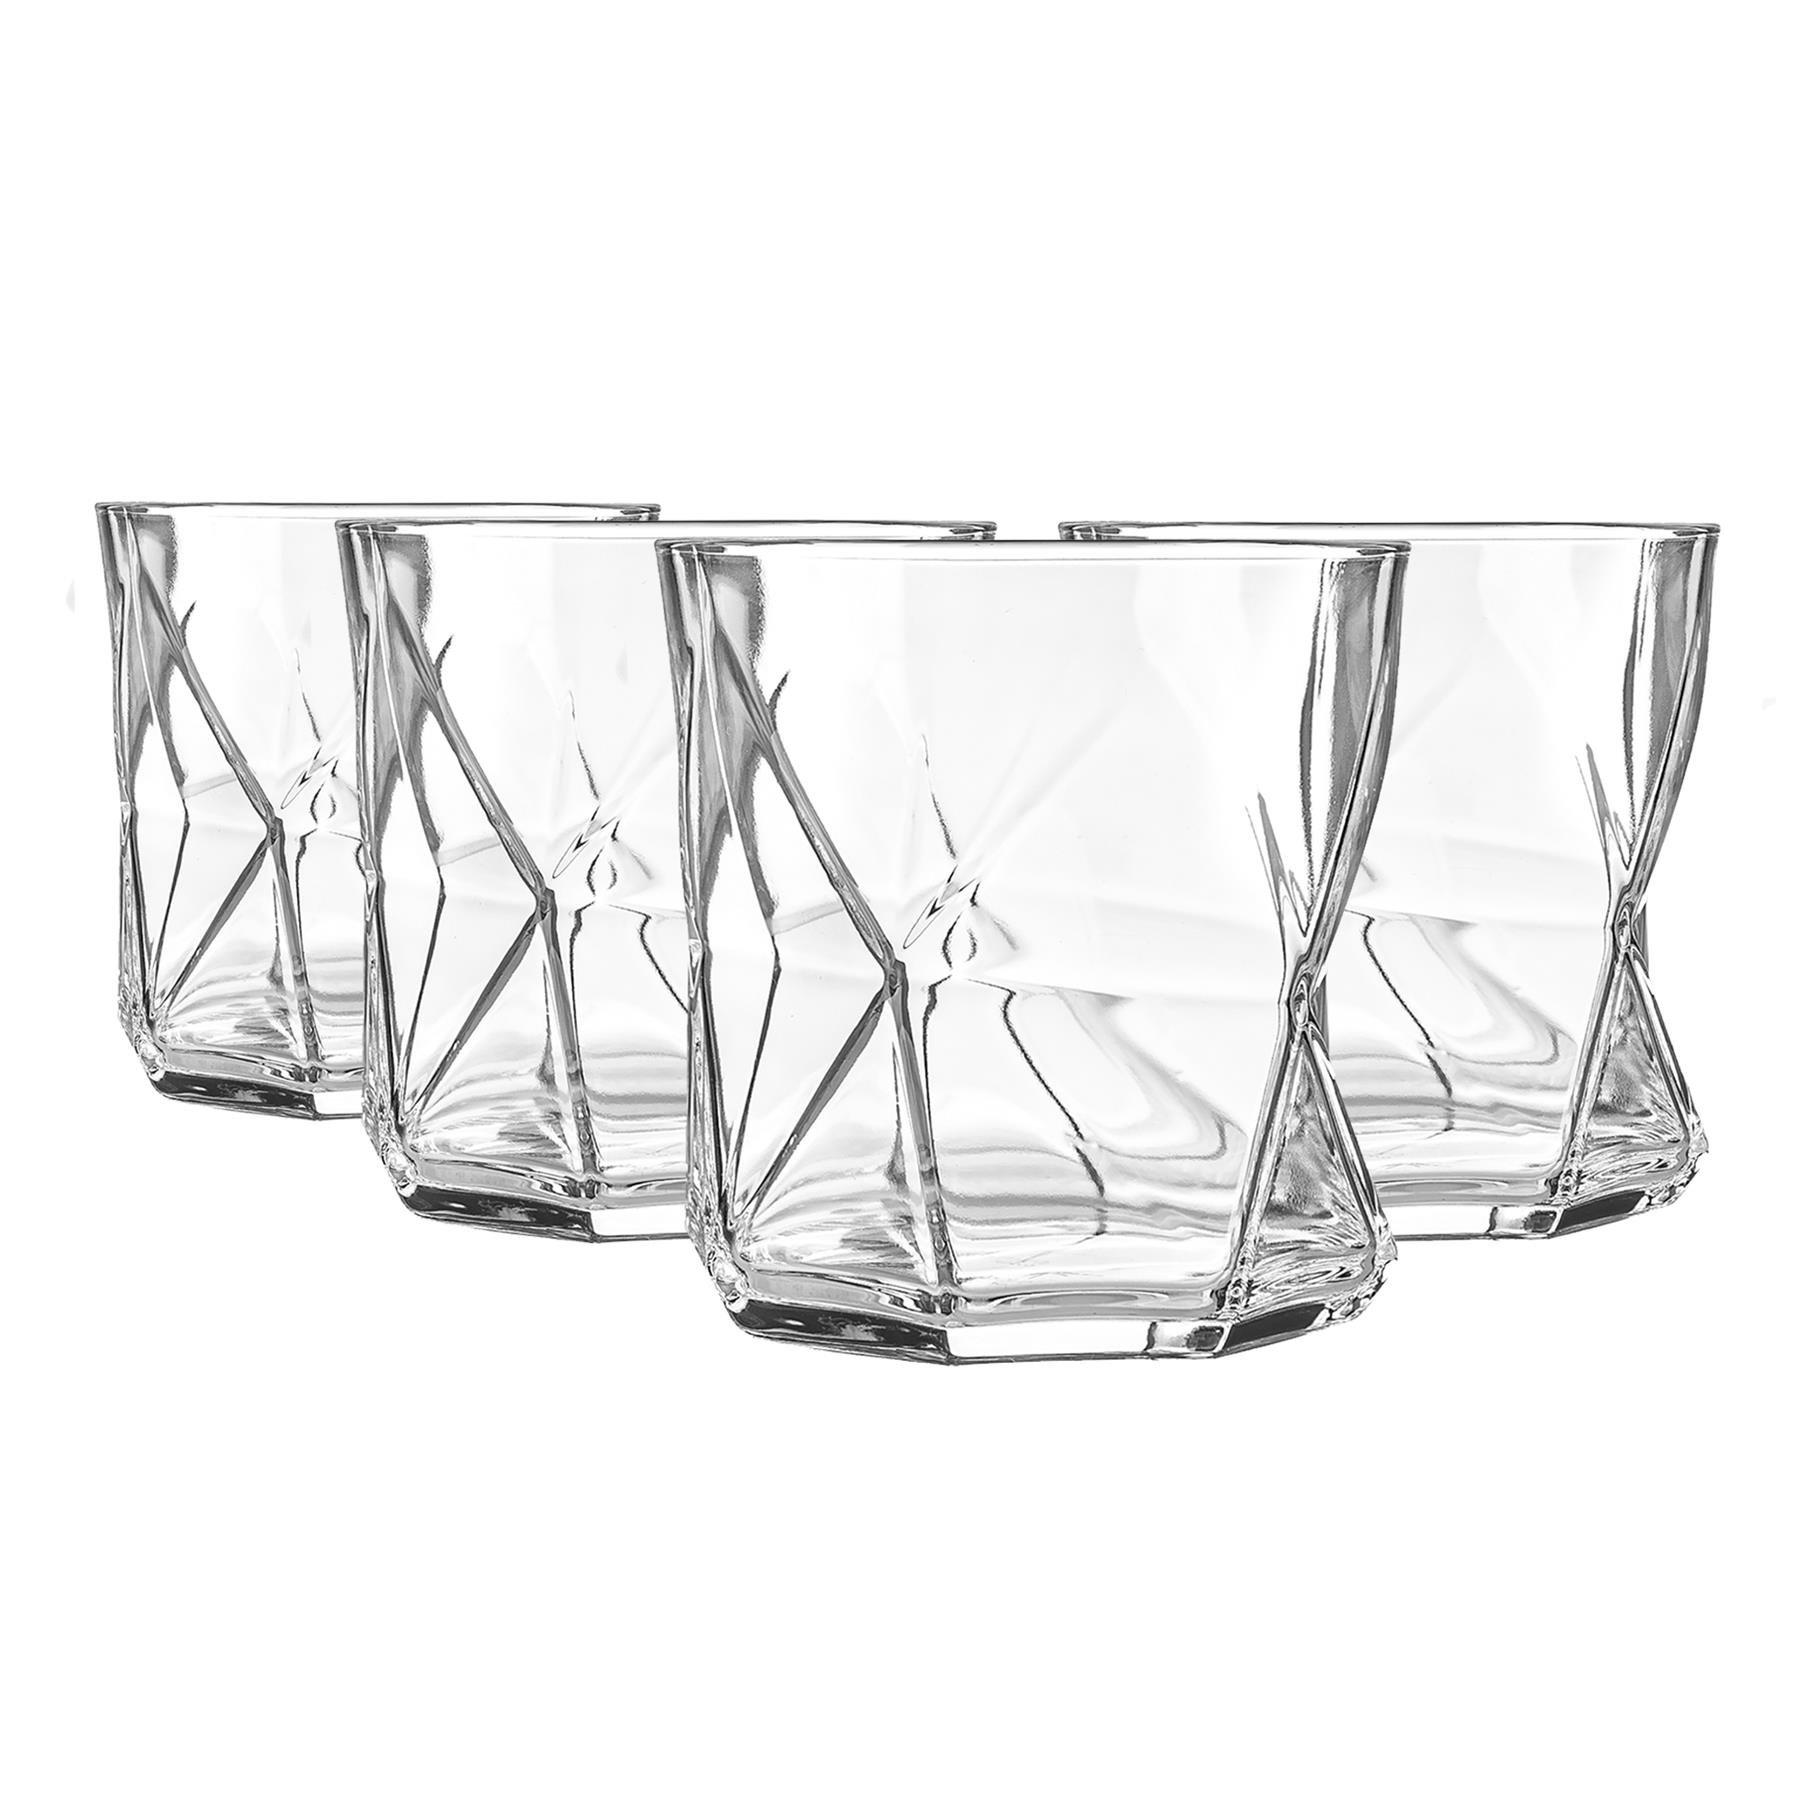 Photos - Glass Bormioli Rocco Cassiopea Whisky Glasses - 330ml - Clear - Pack of 4 